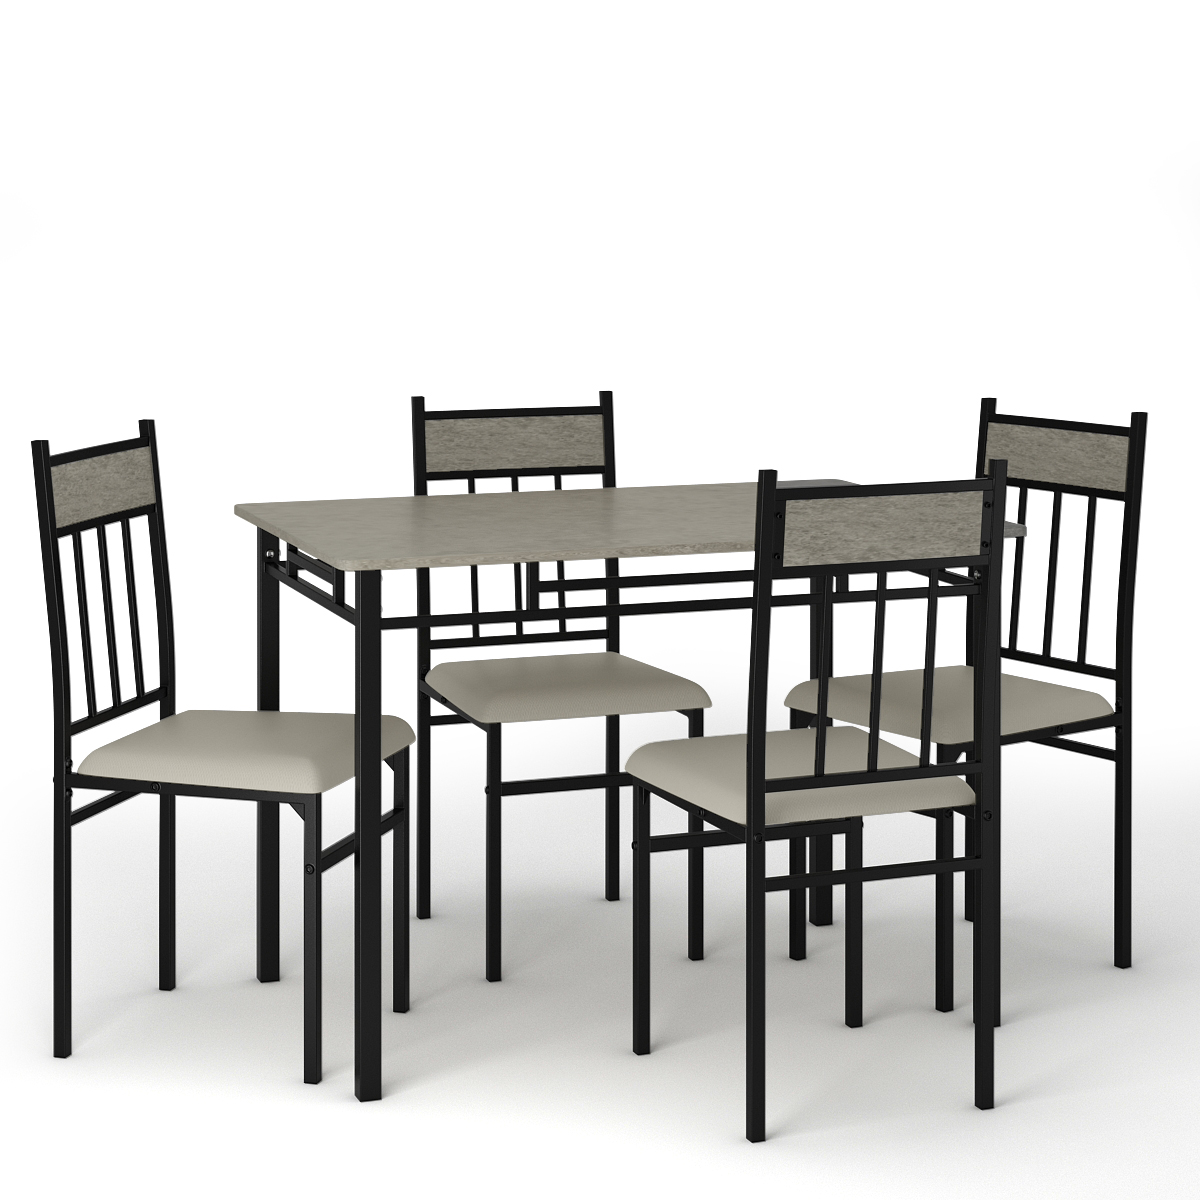 Costway 5 Piece Faux Marble Dining Set Table and 4 Chairs Kitchen Breakfast Furniture Grey - image 2 of 7